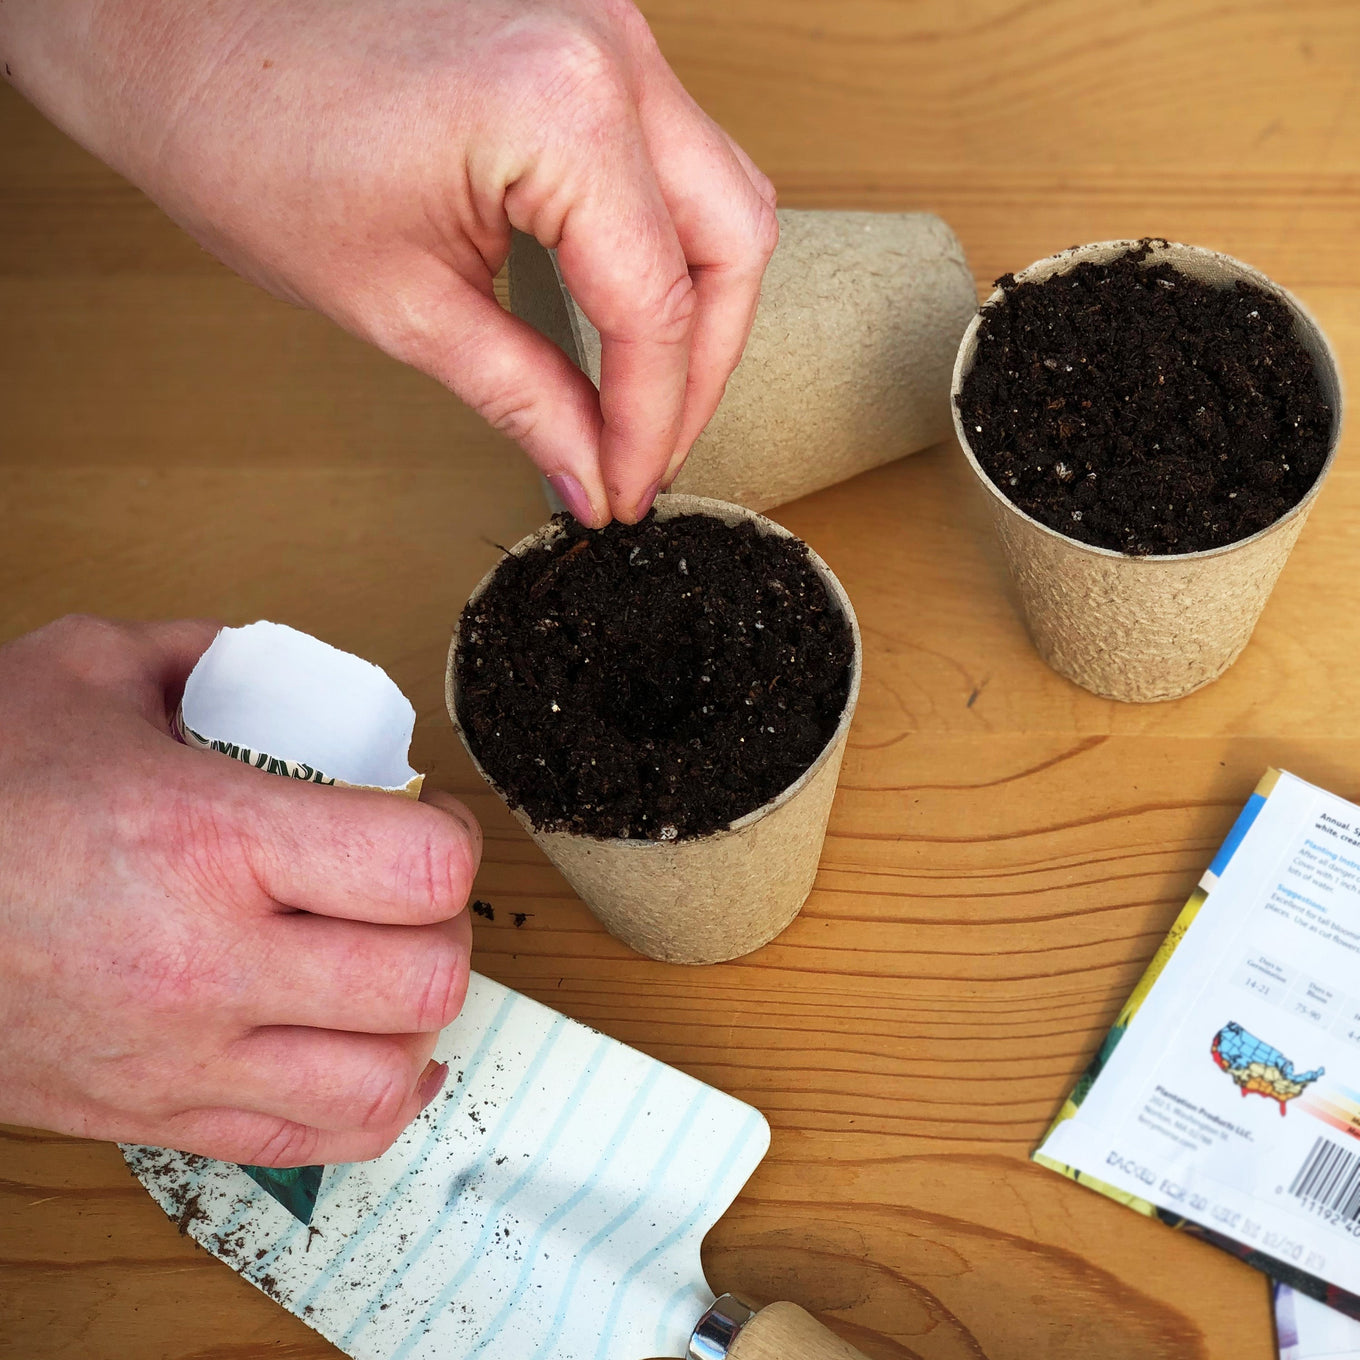 Start your Zucchini Elite Squash seeds in Jiffy biodegradable peat pots filled with Jiffy seed starting mix.